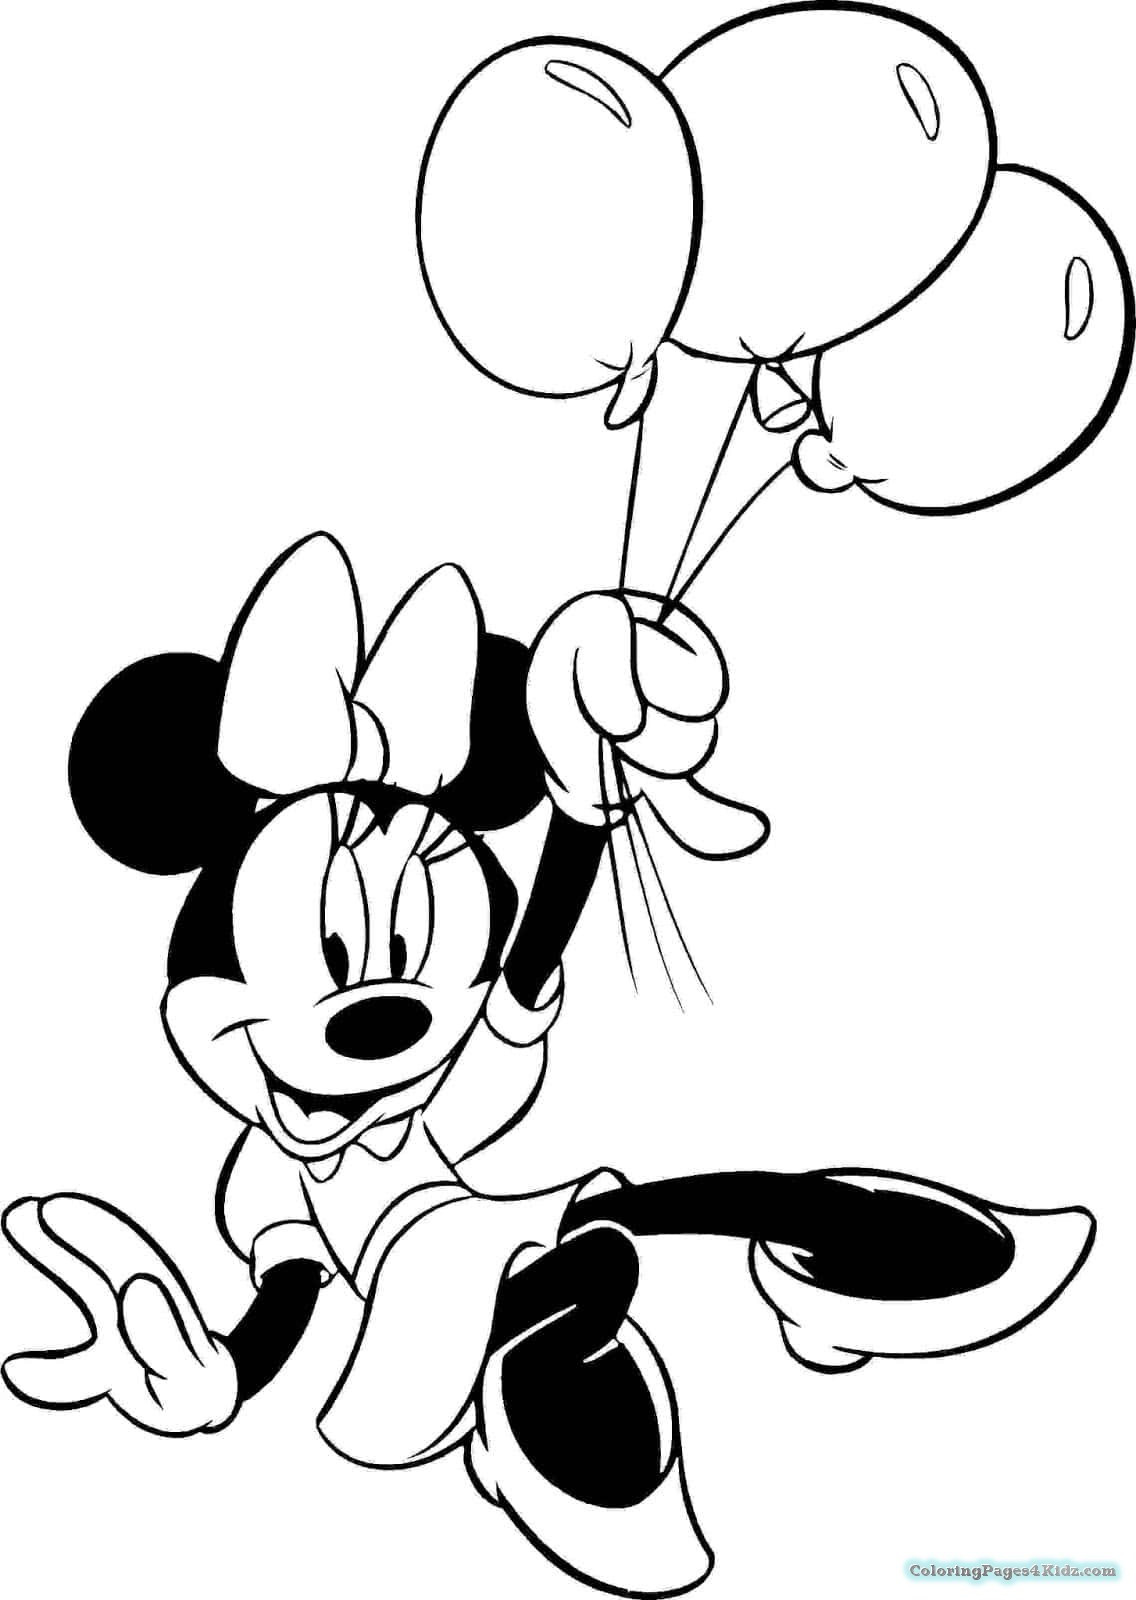 Minnie Mouse Coloring Pages Printable
 Free Coloring Pages For Girls Minnie Mouse